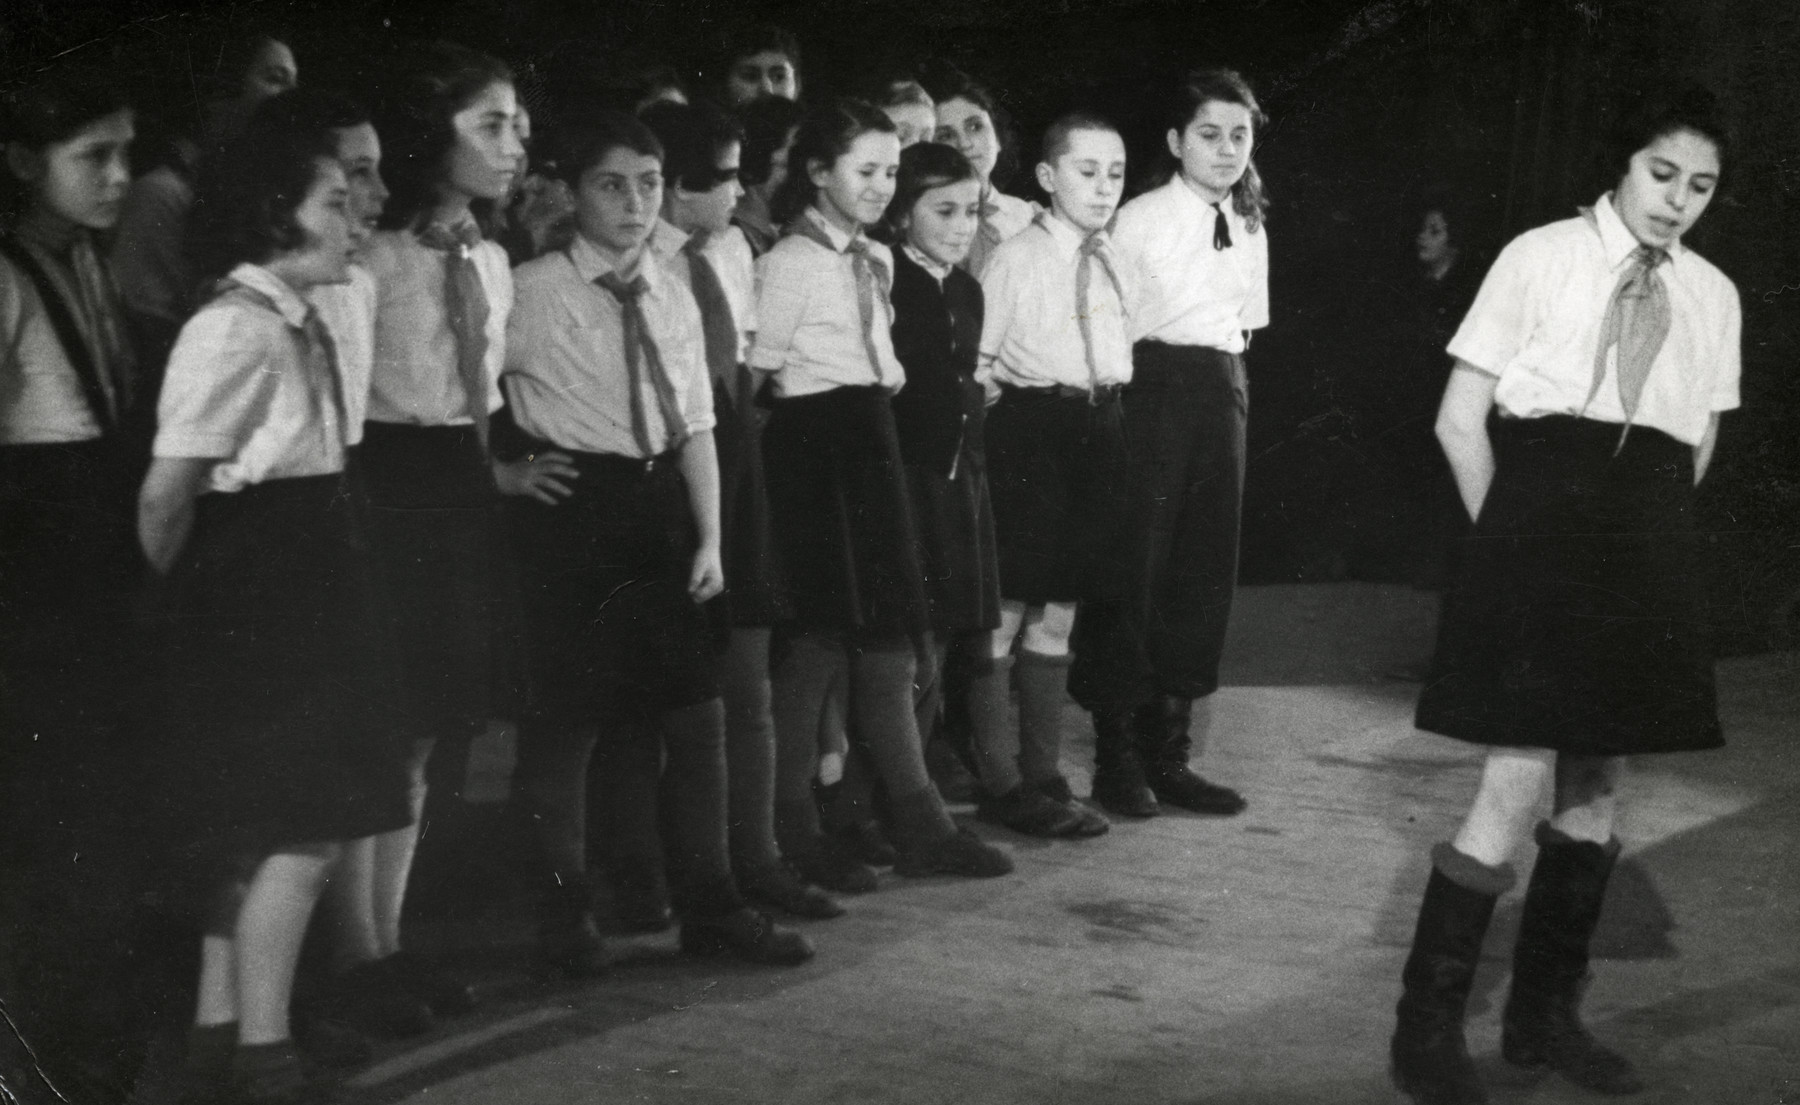 Group portrait of a postwar Jewish orphanage in Kaunas with Communist leanings.

Shalom Kaplan is pictured third from the right.